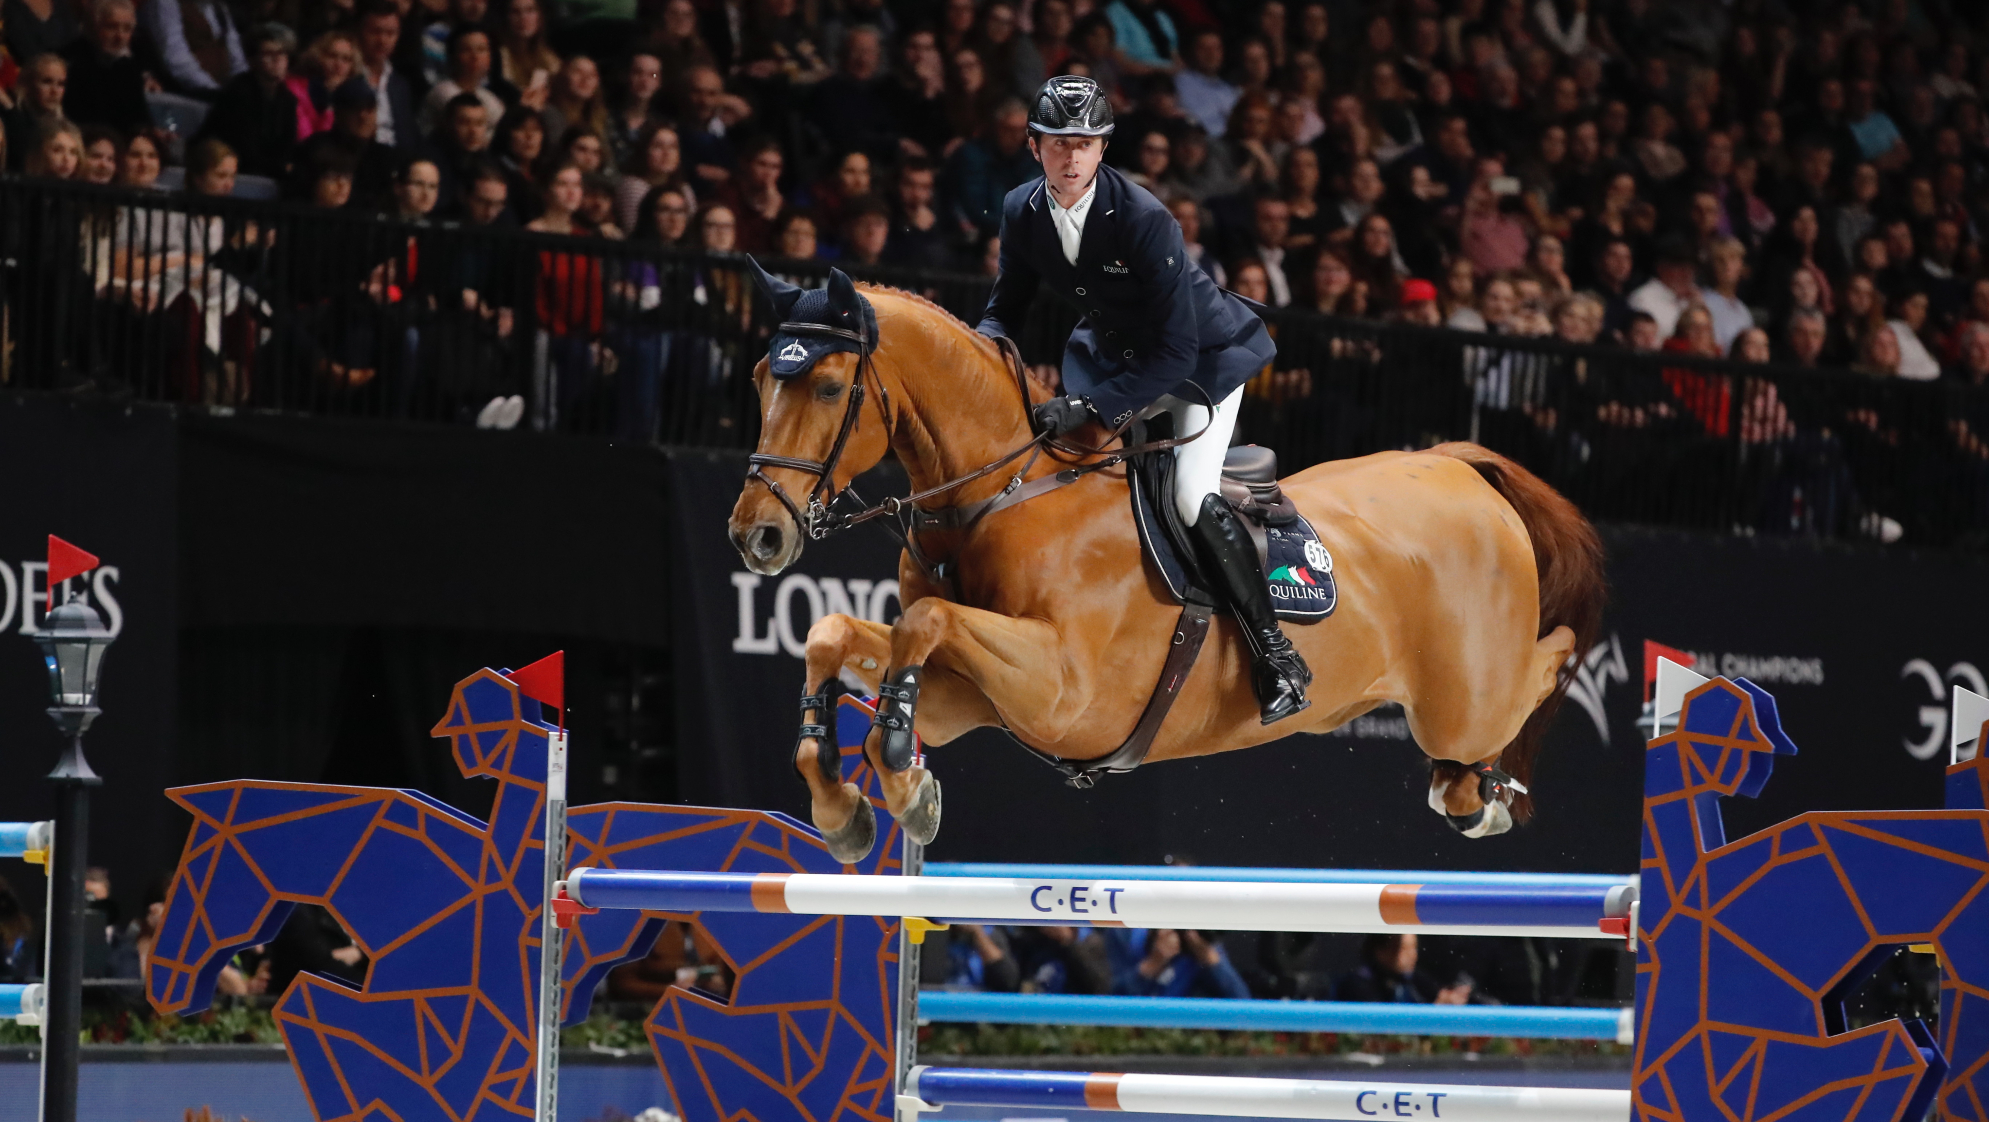 Explosion W and Ben Maher Blast into History with Supersonic LGCT Super Grand Prix Win